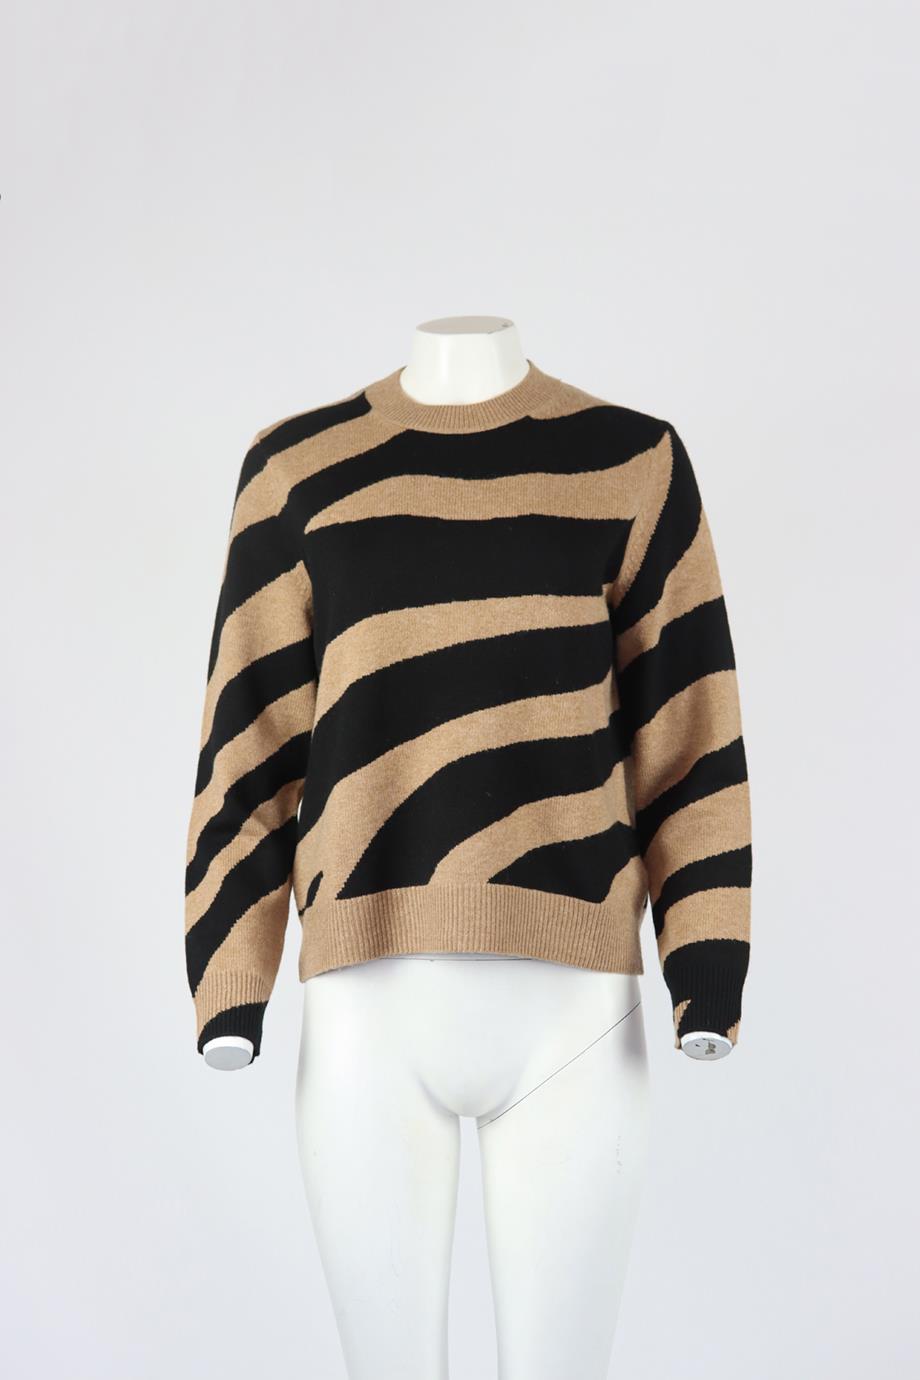 CHINTI AND PARKER INTARSIA WOOL BLEND SWEATER SMALL